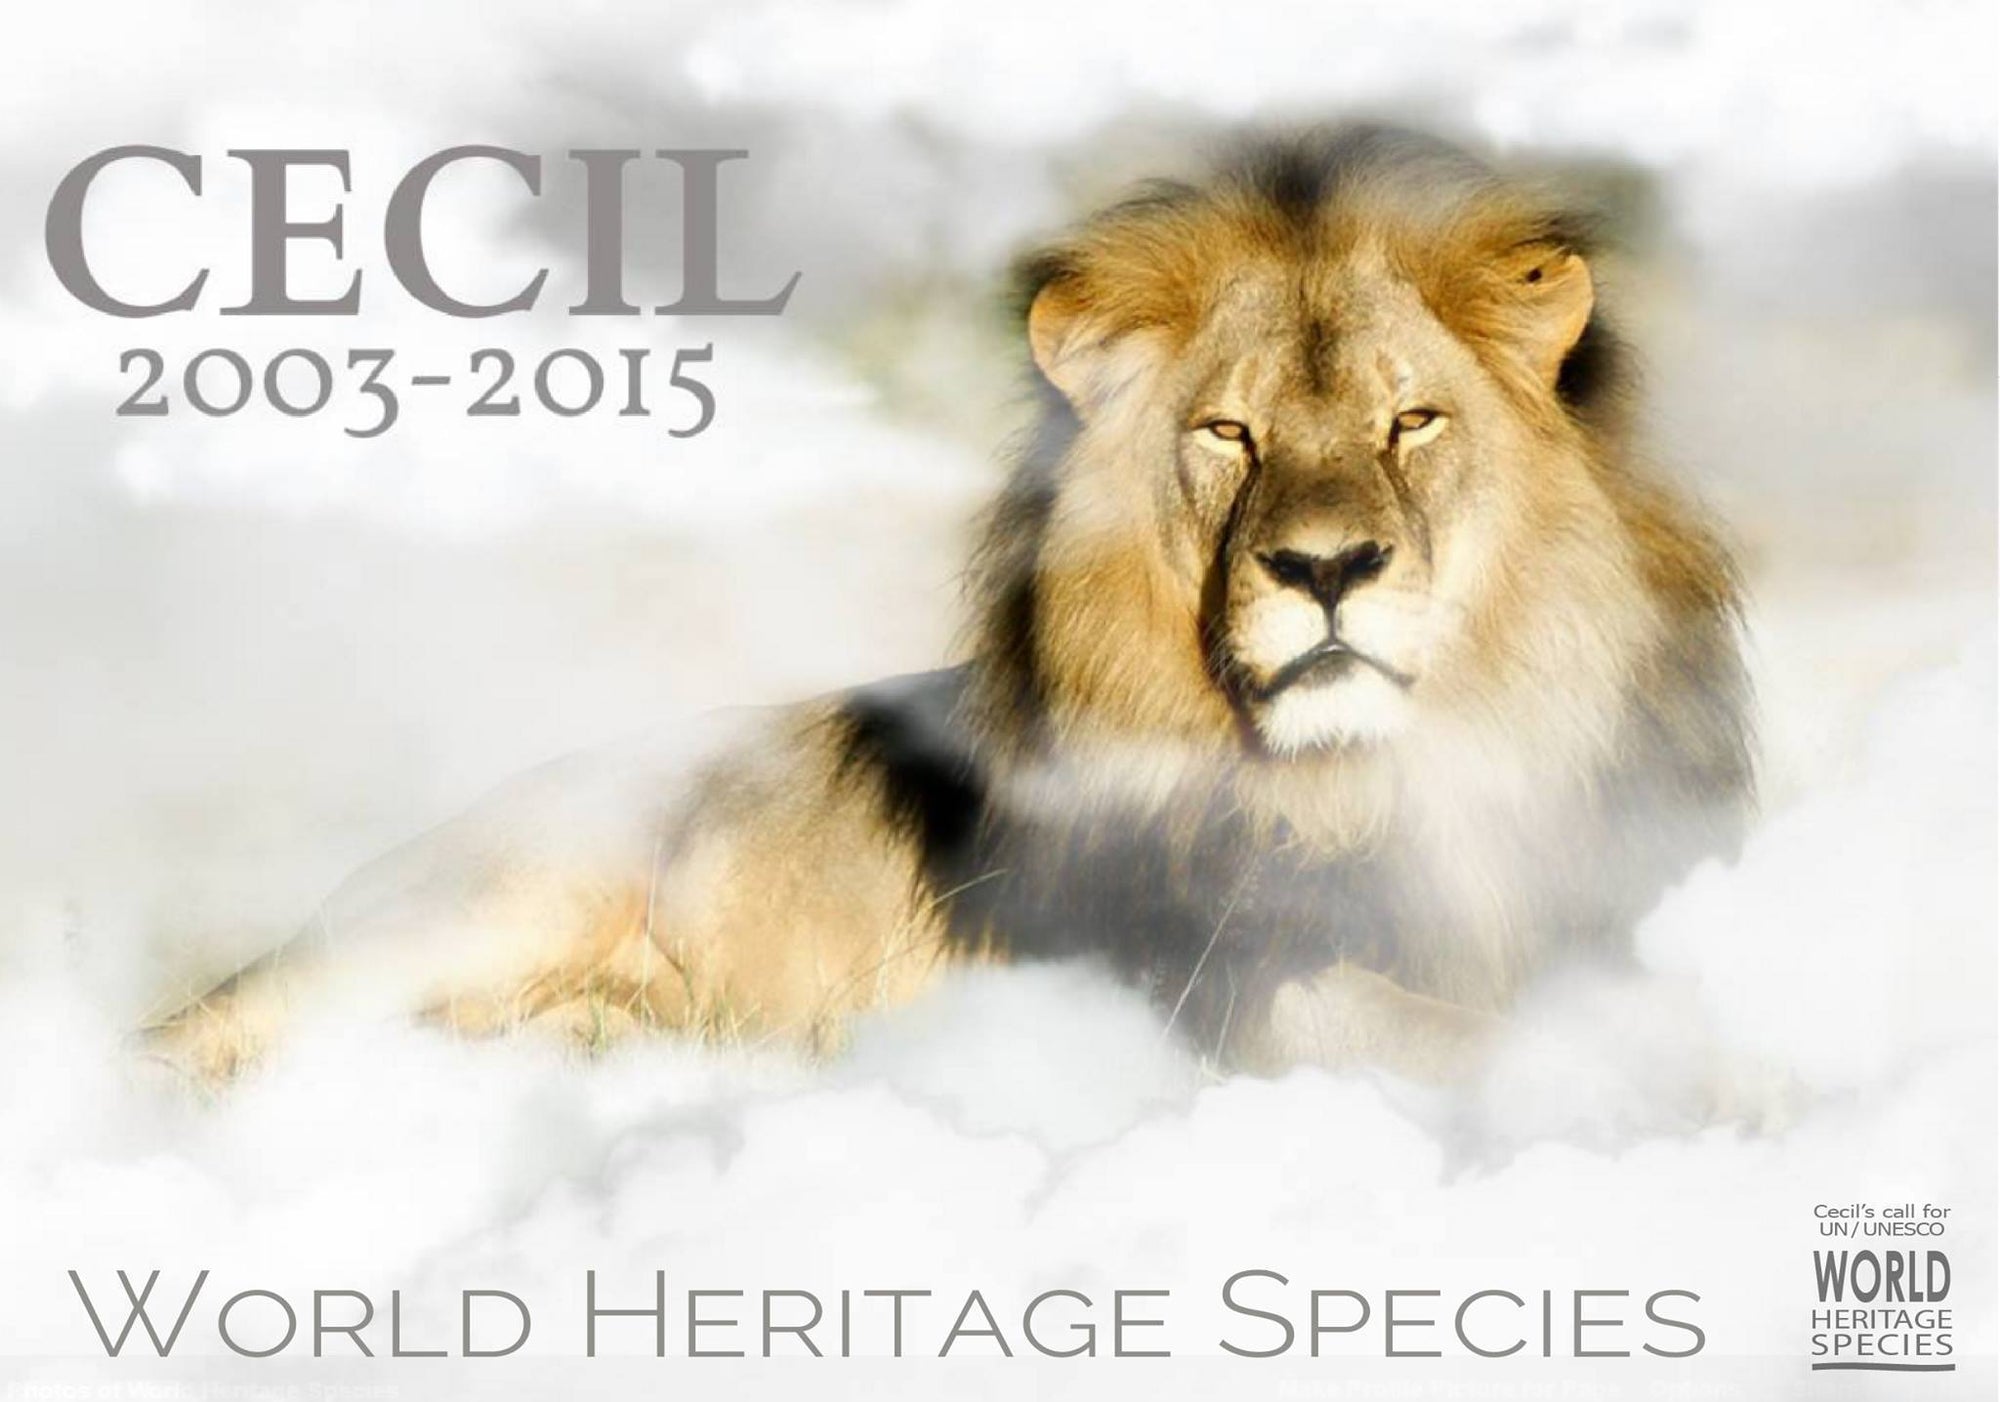 Honor Cecil by Signing World Heritage Species Petition  #WorldHeritageSpecies